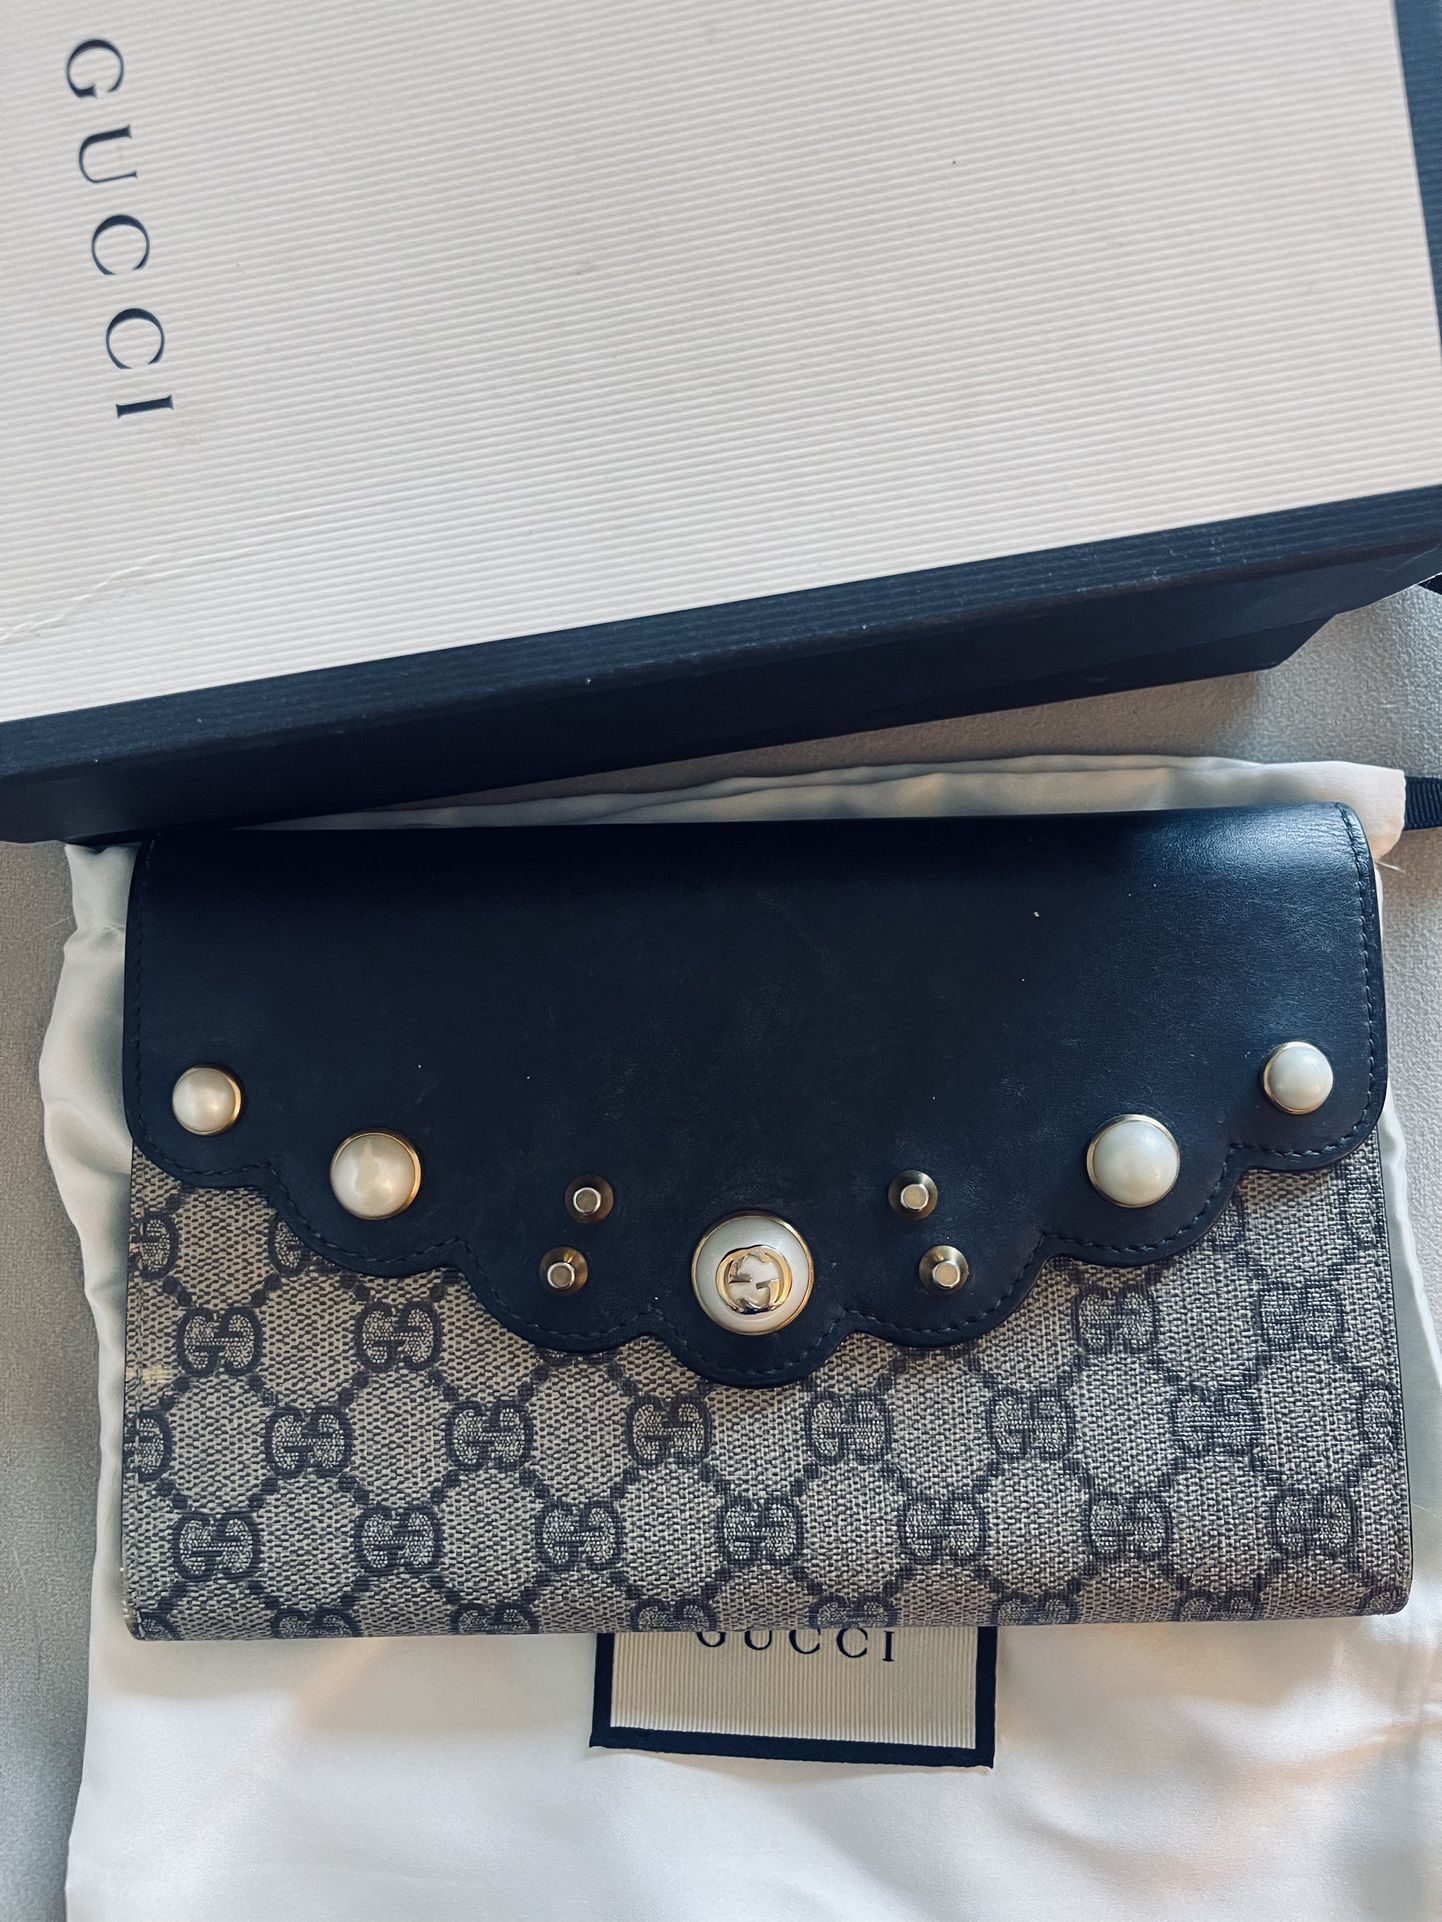 Gucci Large Wallet